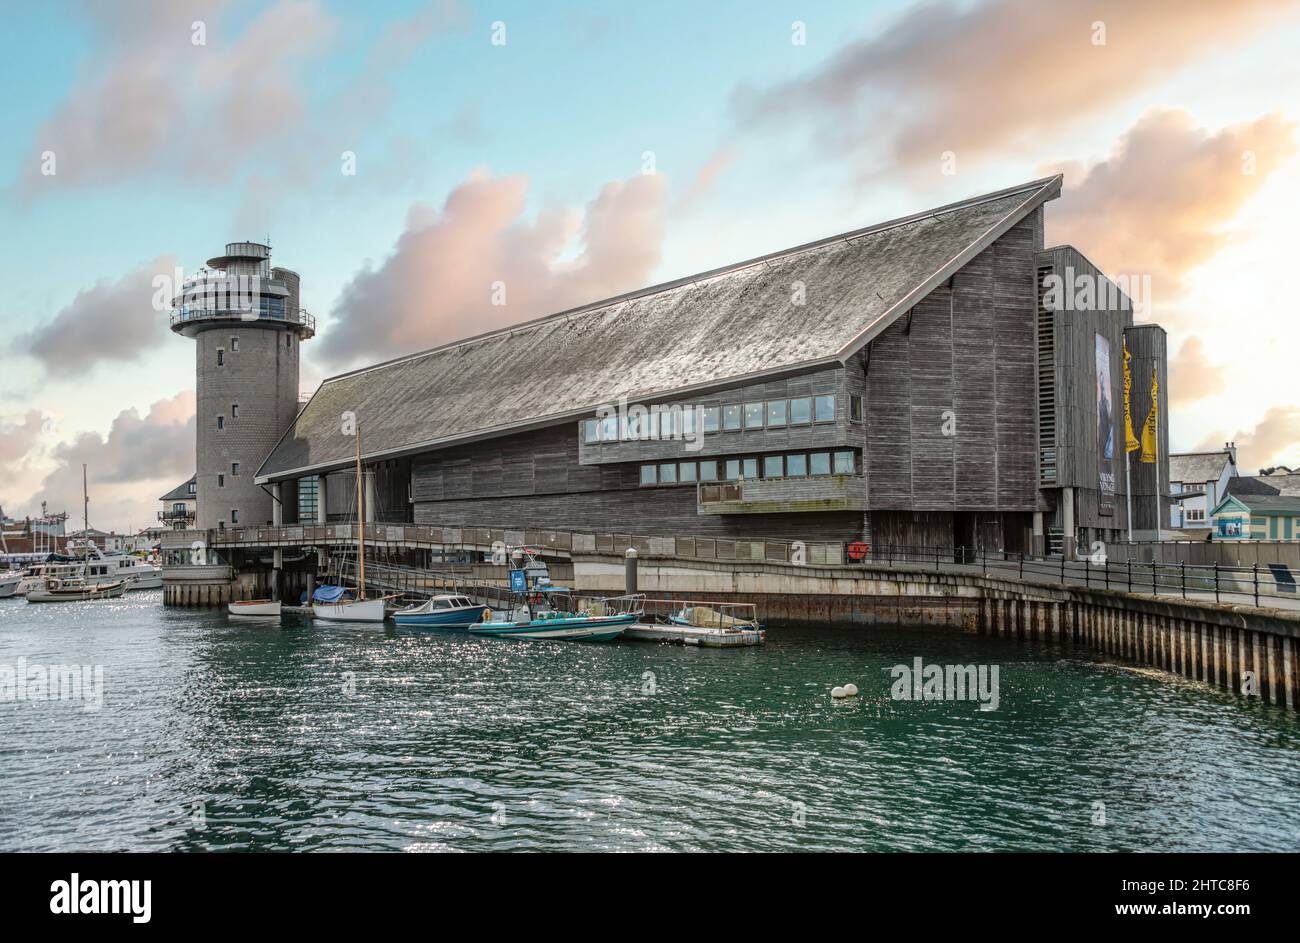 National Maritime Museum at the harbor of Falmouth, Cornwall, England, UK Stock Photo